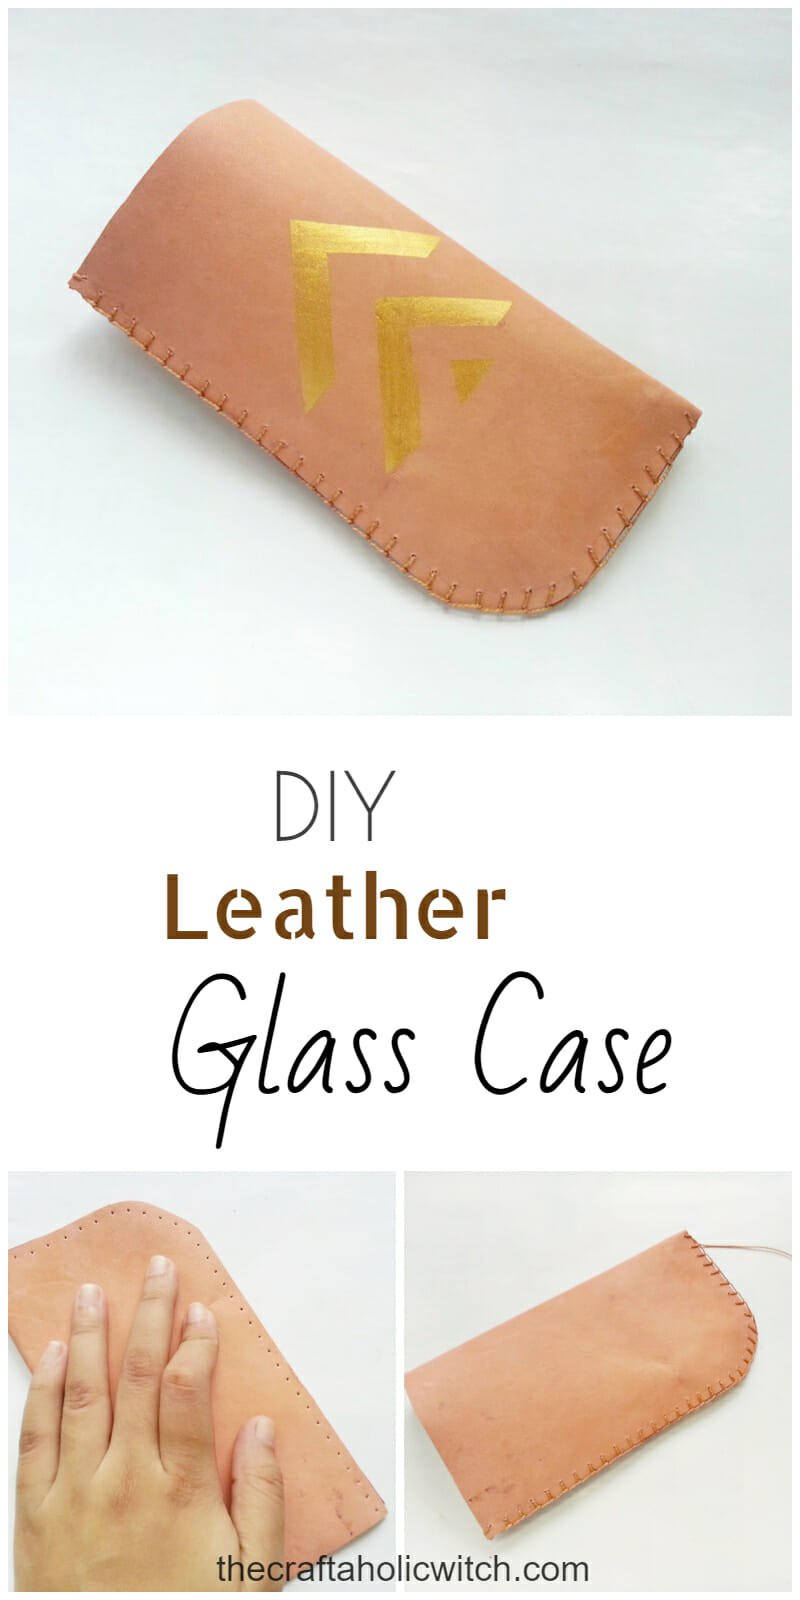 Glass case - DIY Leather Glass Case